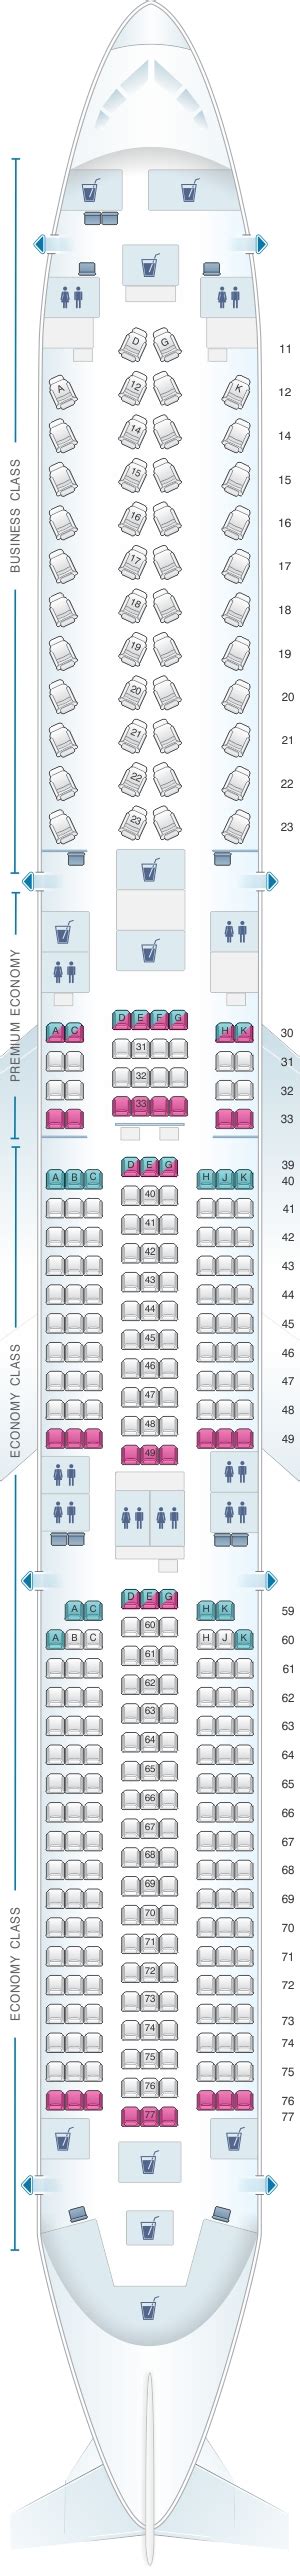 7 Photos Airbus A350 Seating Chart Cathay Pacific And View Alqu Blog